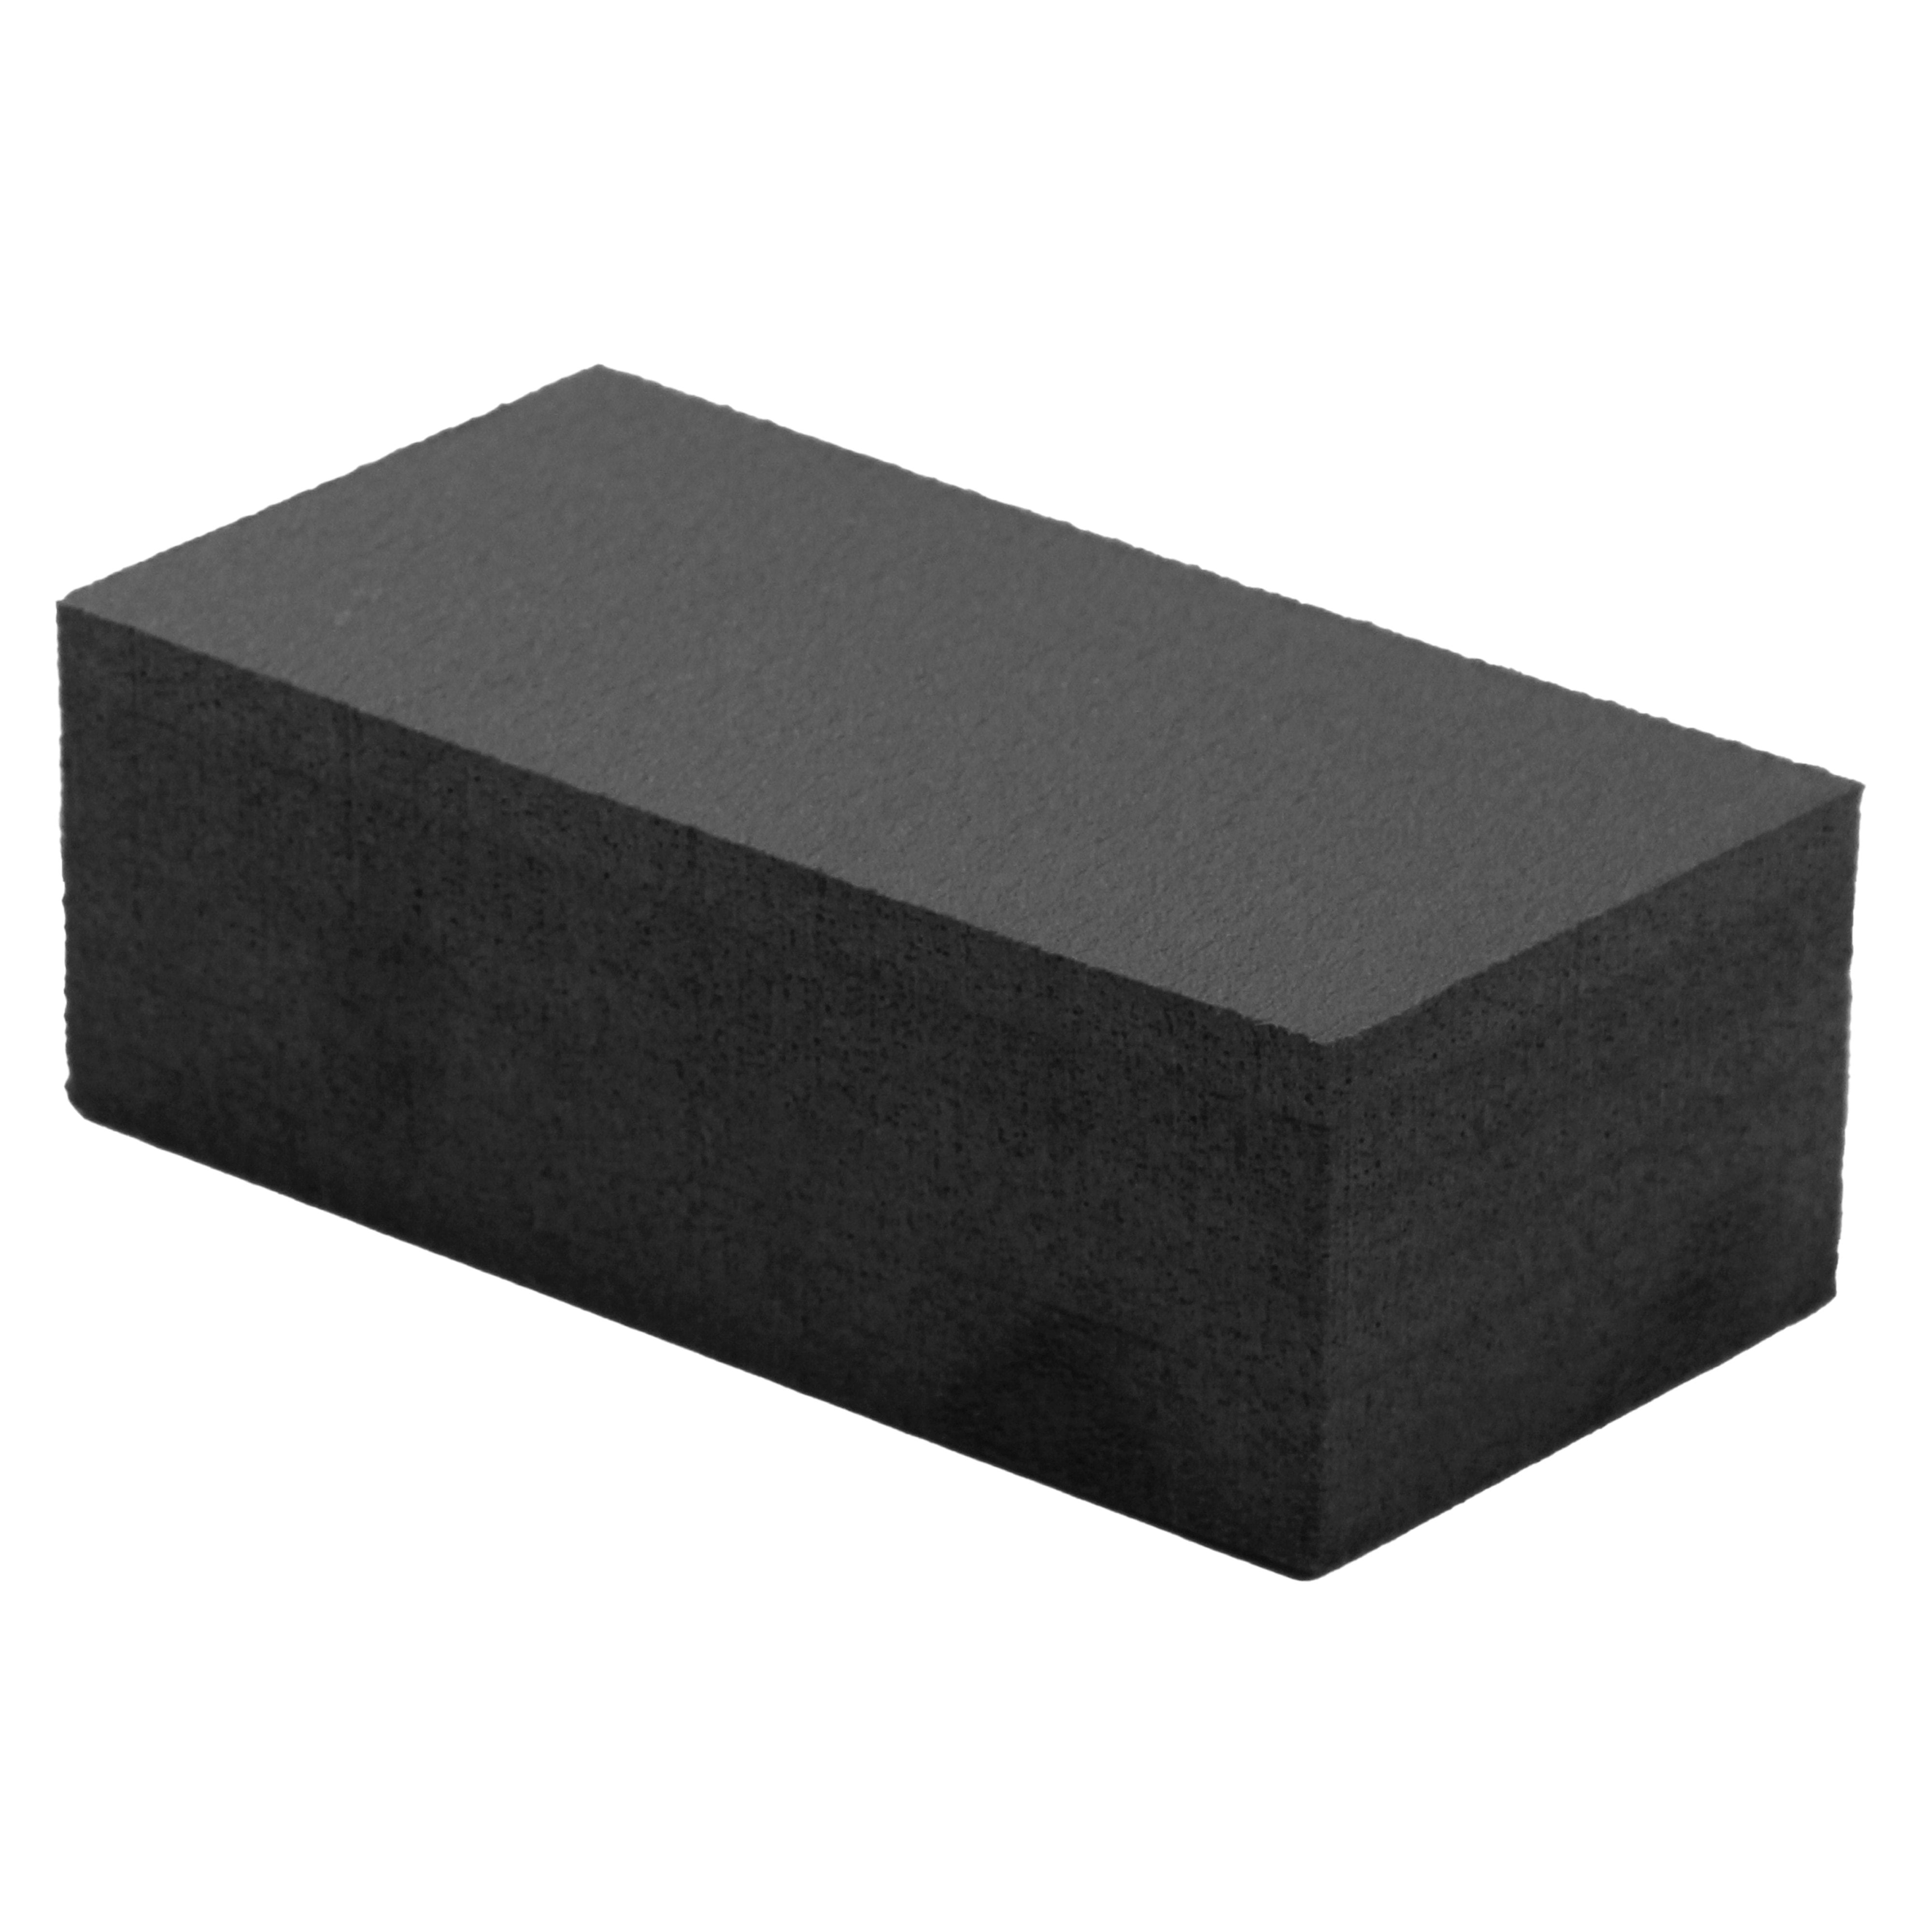 Heavy Duty Foam Dunnage Flat Reusable Cushion Transport Storage Organization Shipping Boxes Crates Containers Warehouses Waterproof 6 x 3 x 2 Inches